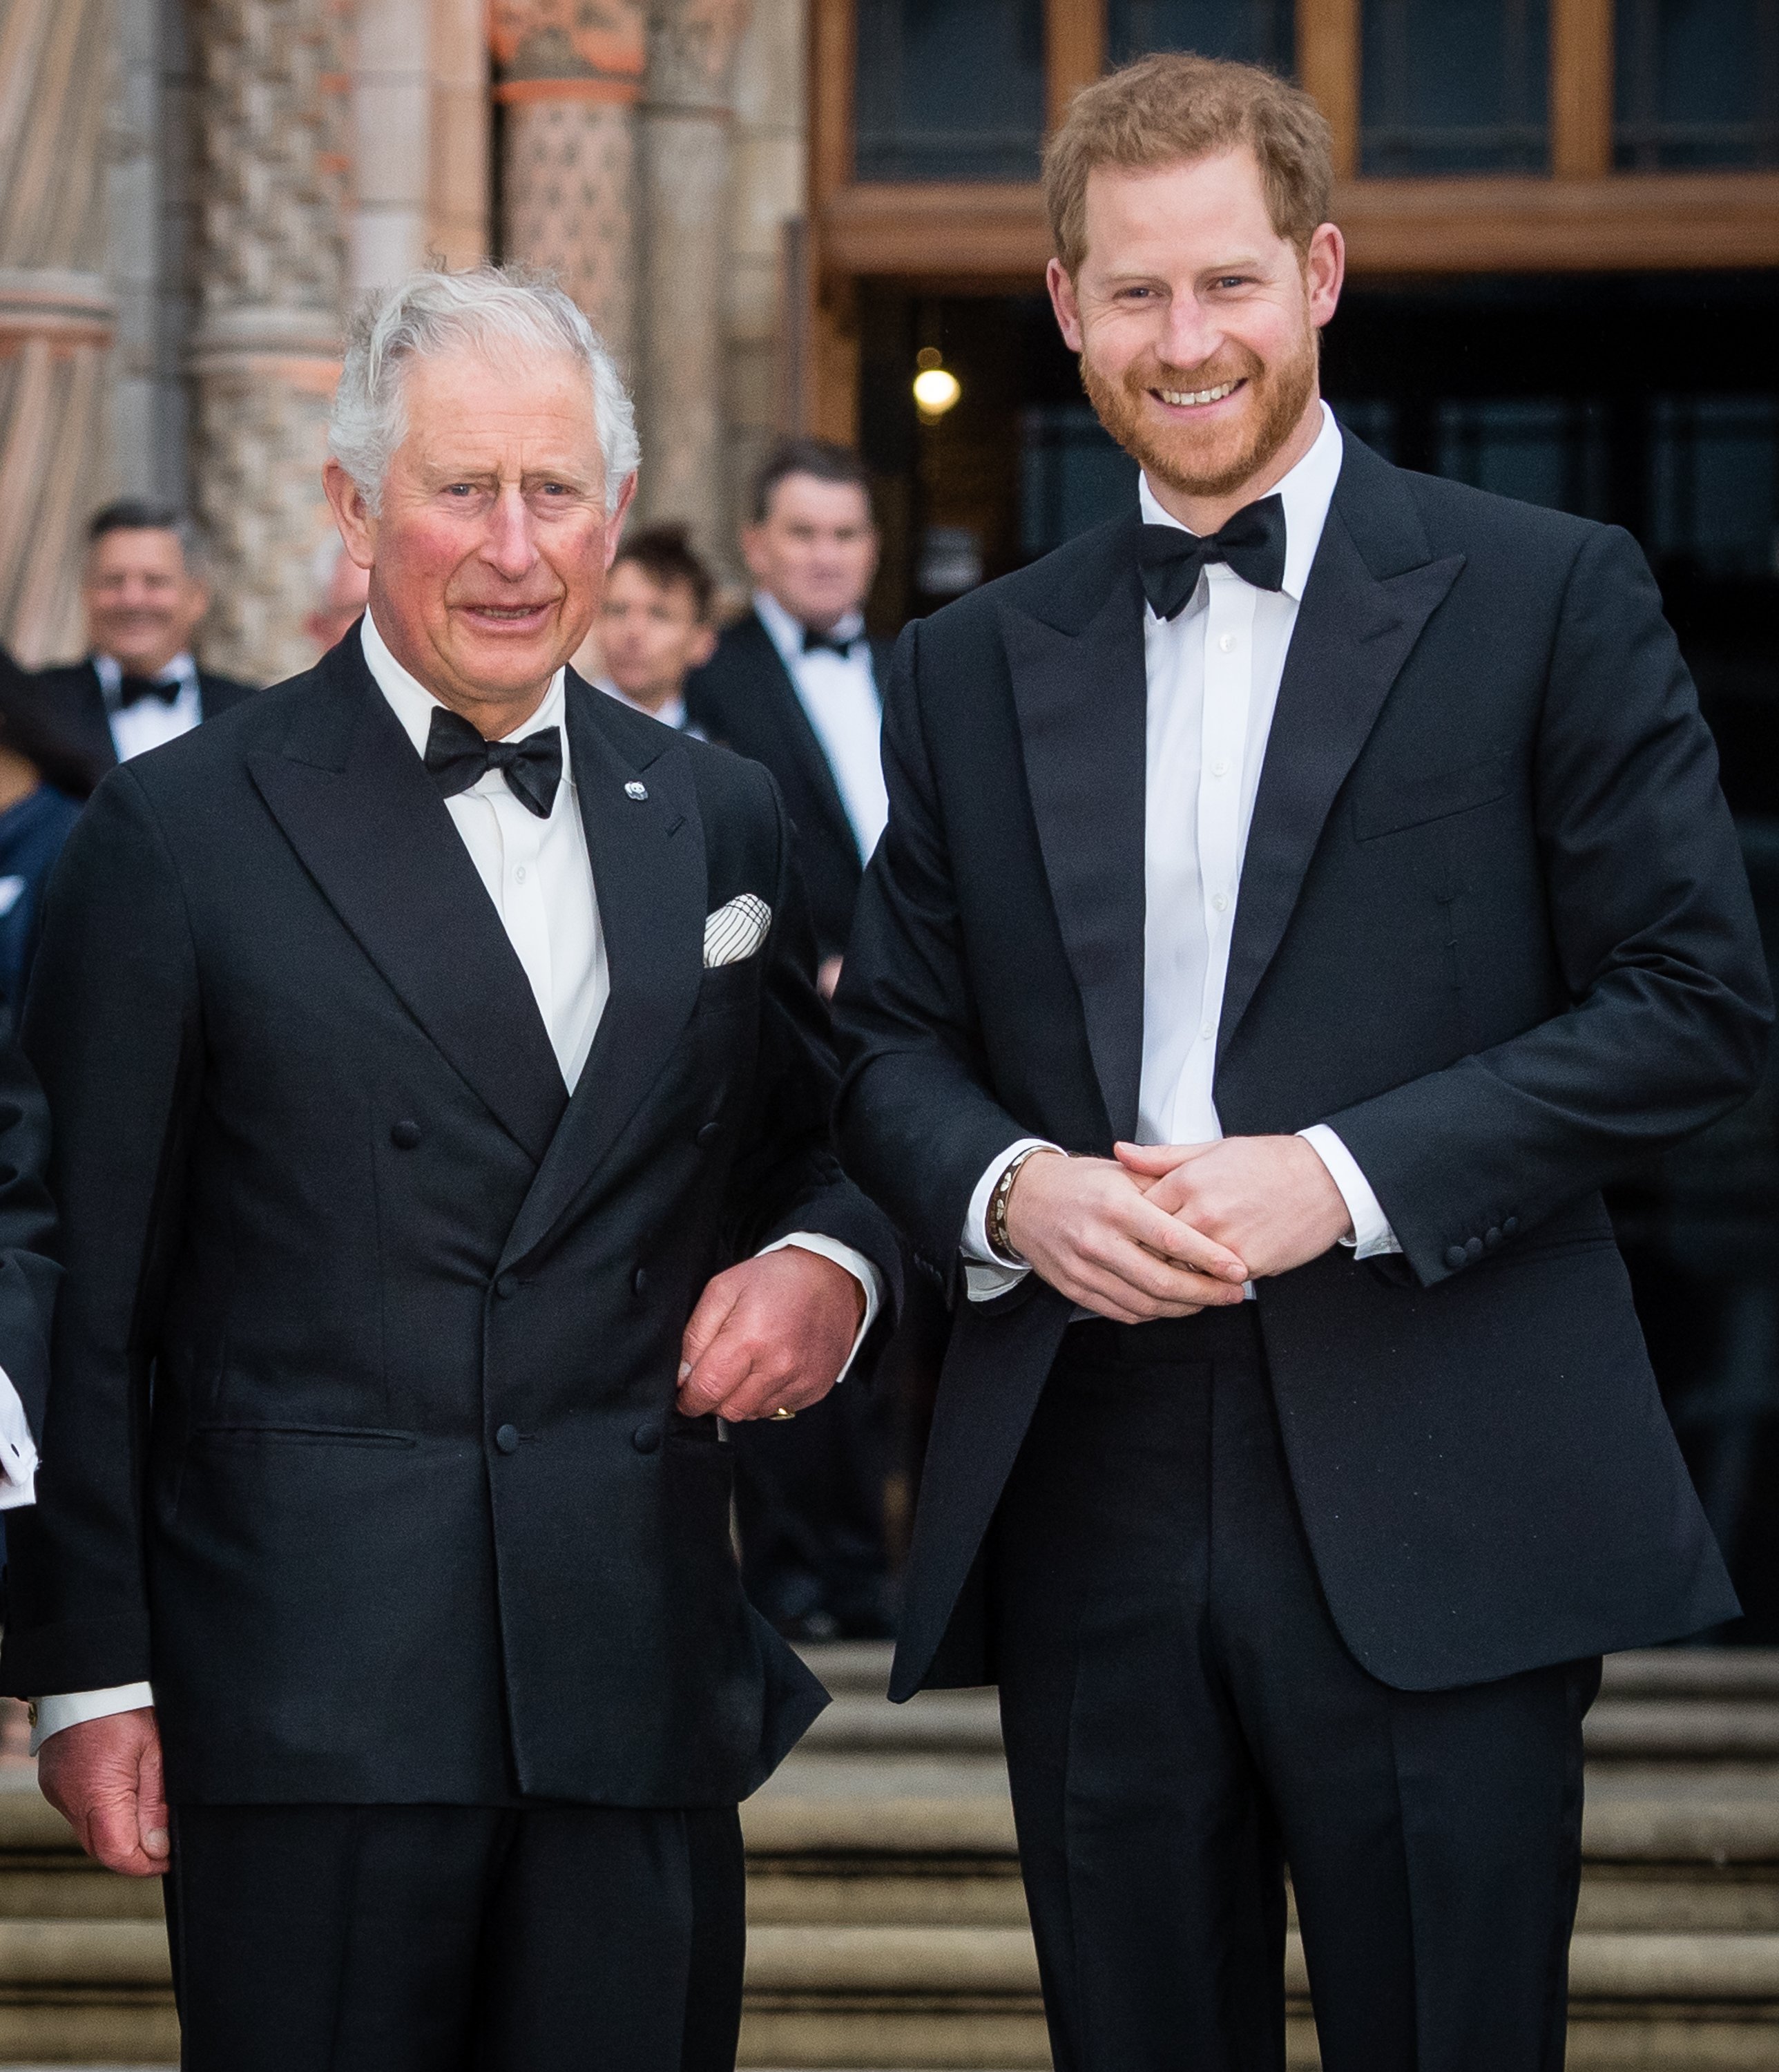 King Charles III and Prince Harry, Duke of Sussex, at the "Our Planet" global premiere at the Natural History Museum on April 04, 2019, in London, England. | Source: Getty Images